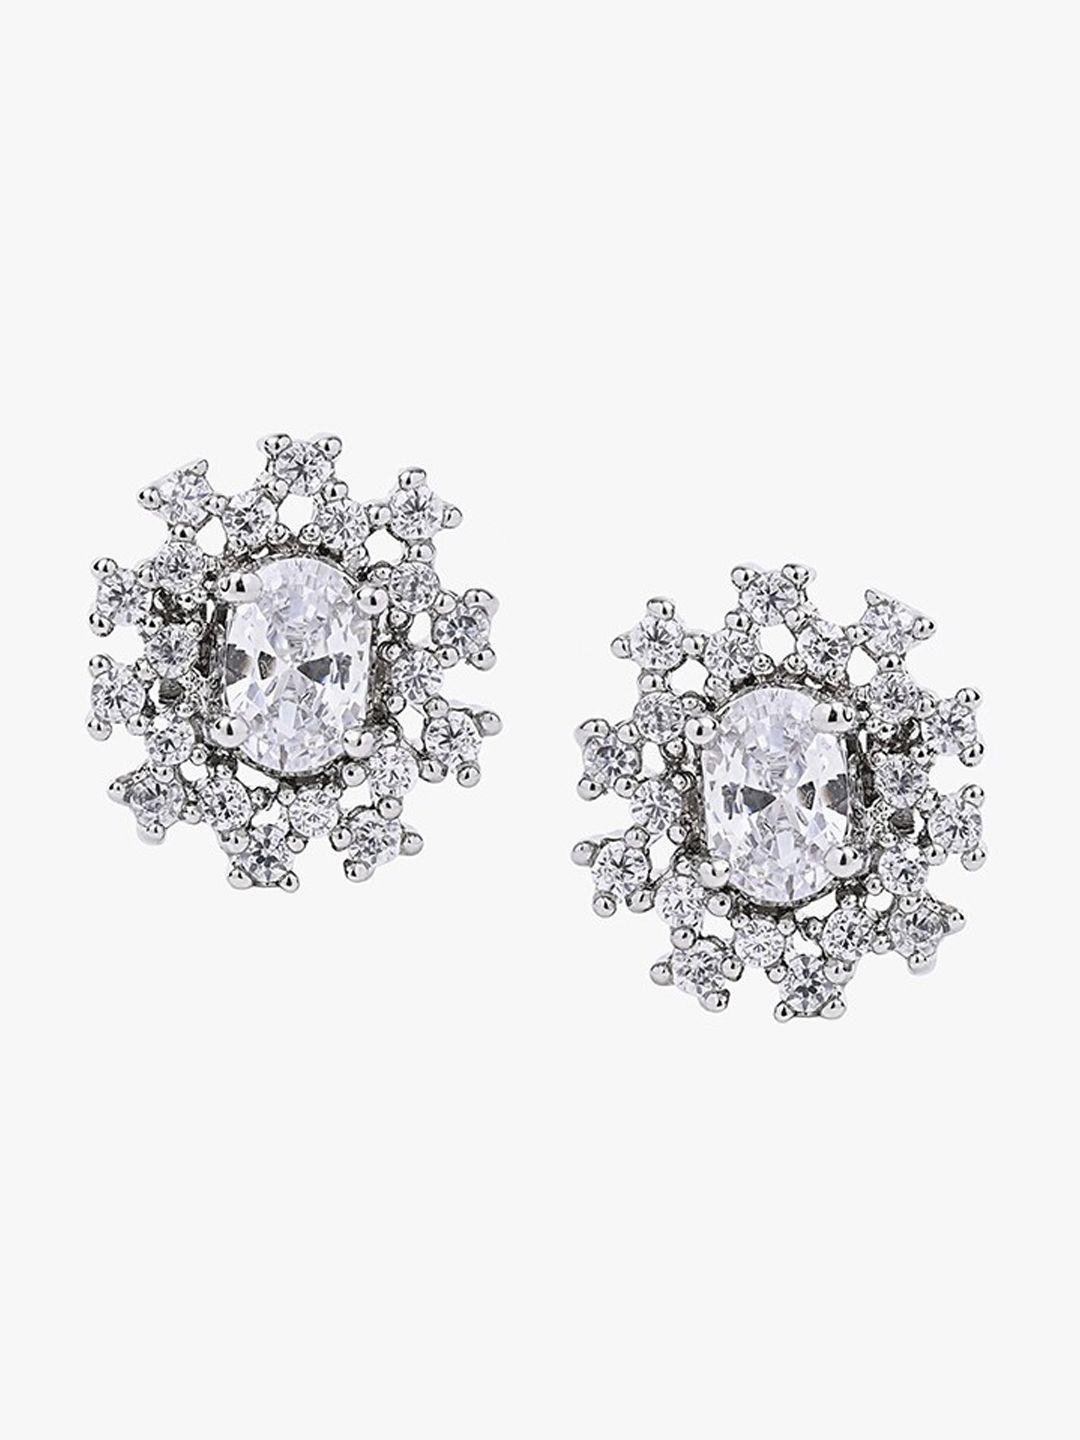 mikoto by fablestreet silver-toned contemporary studs earrings